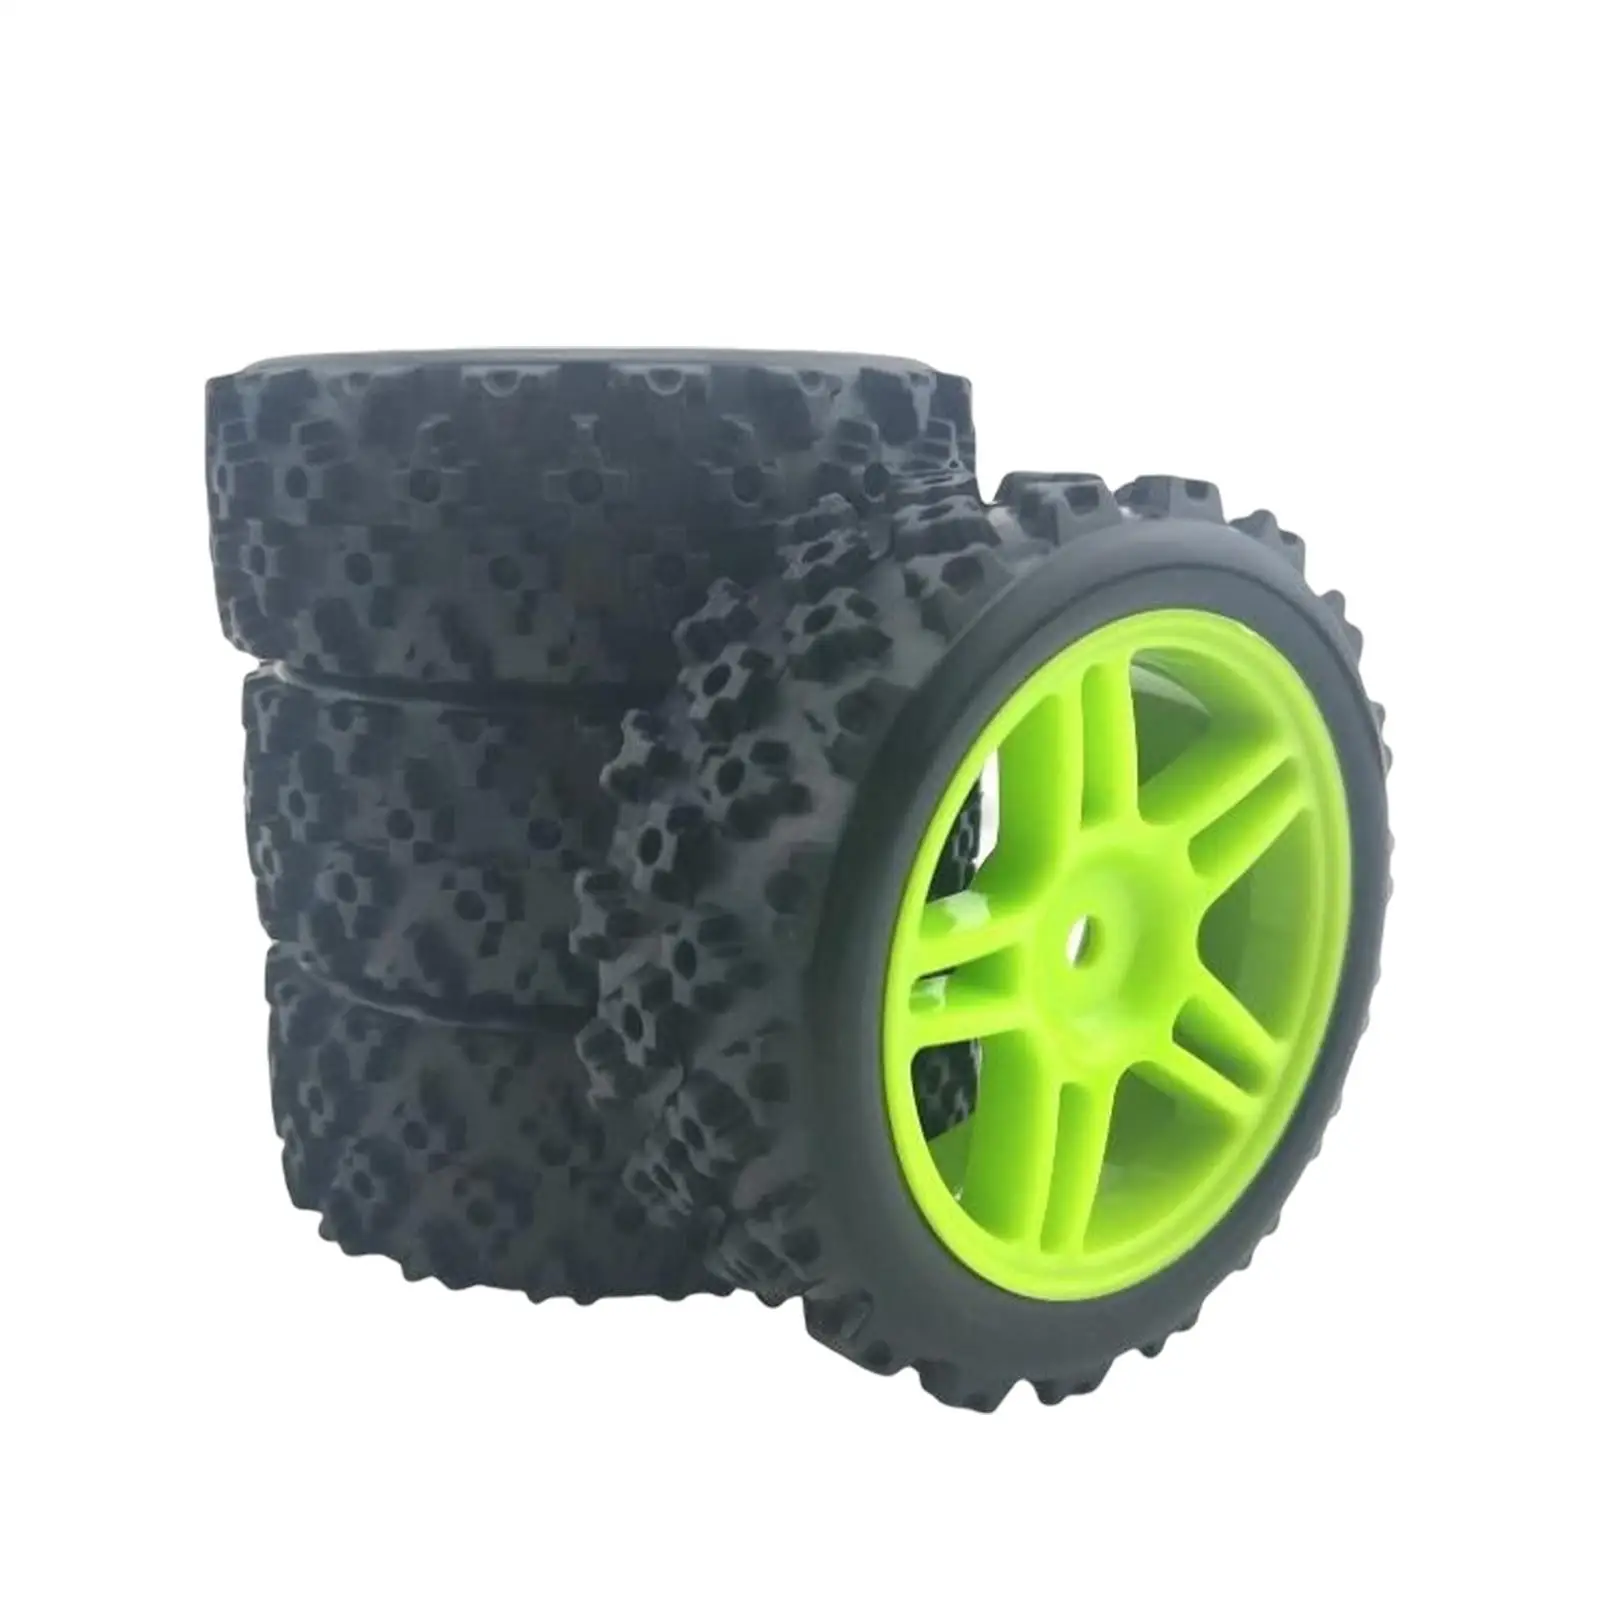 4 Pieces 12mm Hex Rubber Tires Universal Replacement Durable 71mm for Remo 1631 Buggy Toy Parts Hobby Model Vehicle